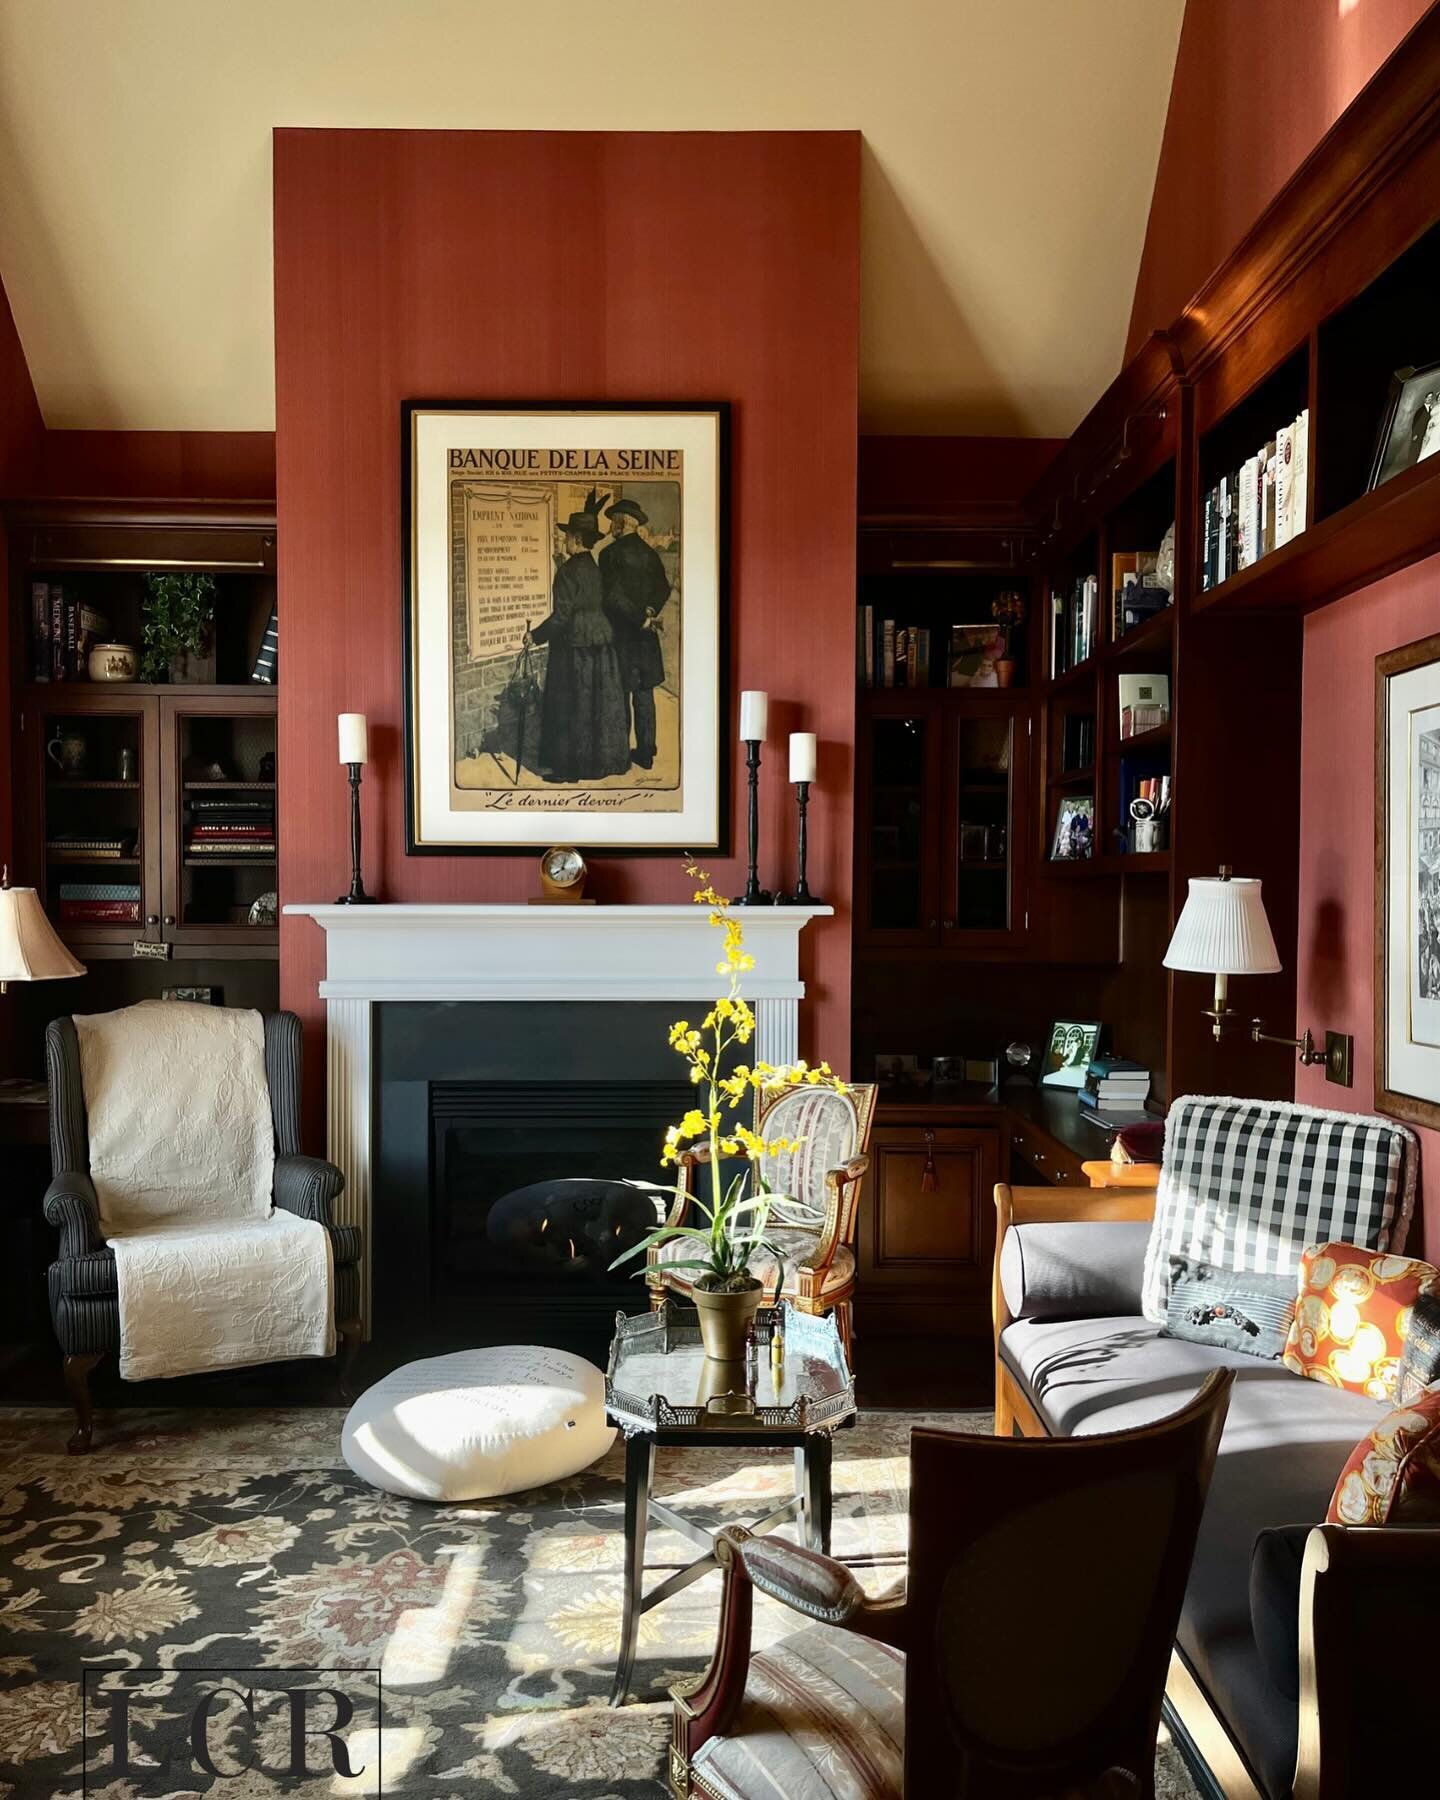 Enter into an English Country Traditional styled parlor room. Designed fabulously by our principal designer, Peter Robbin. A moody library and sitting room highlighted by dark woods, patterns and fabrics. Note the gorgeous afternoon sunlight peeking 